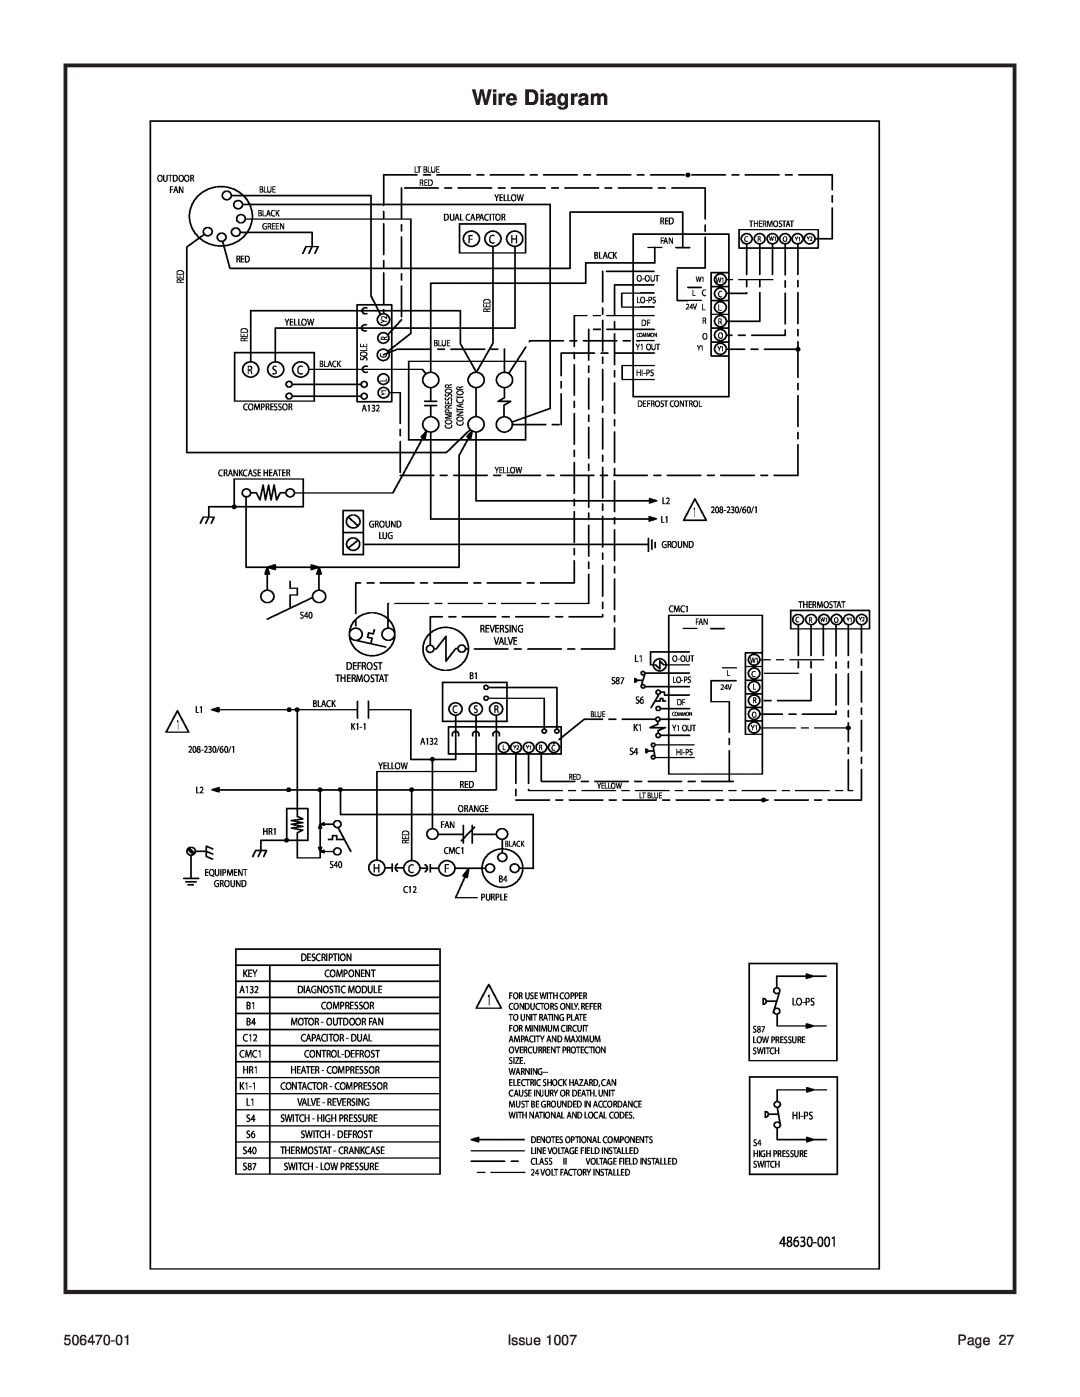 Lennox International Inc 4HP18LT manual Wire Diagram, 48630-001, Issue, Page, 506470-01 